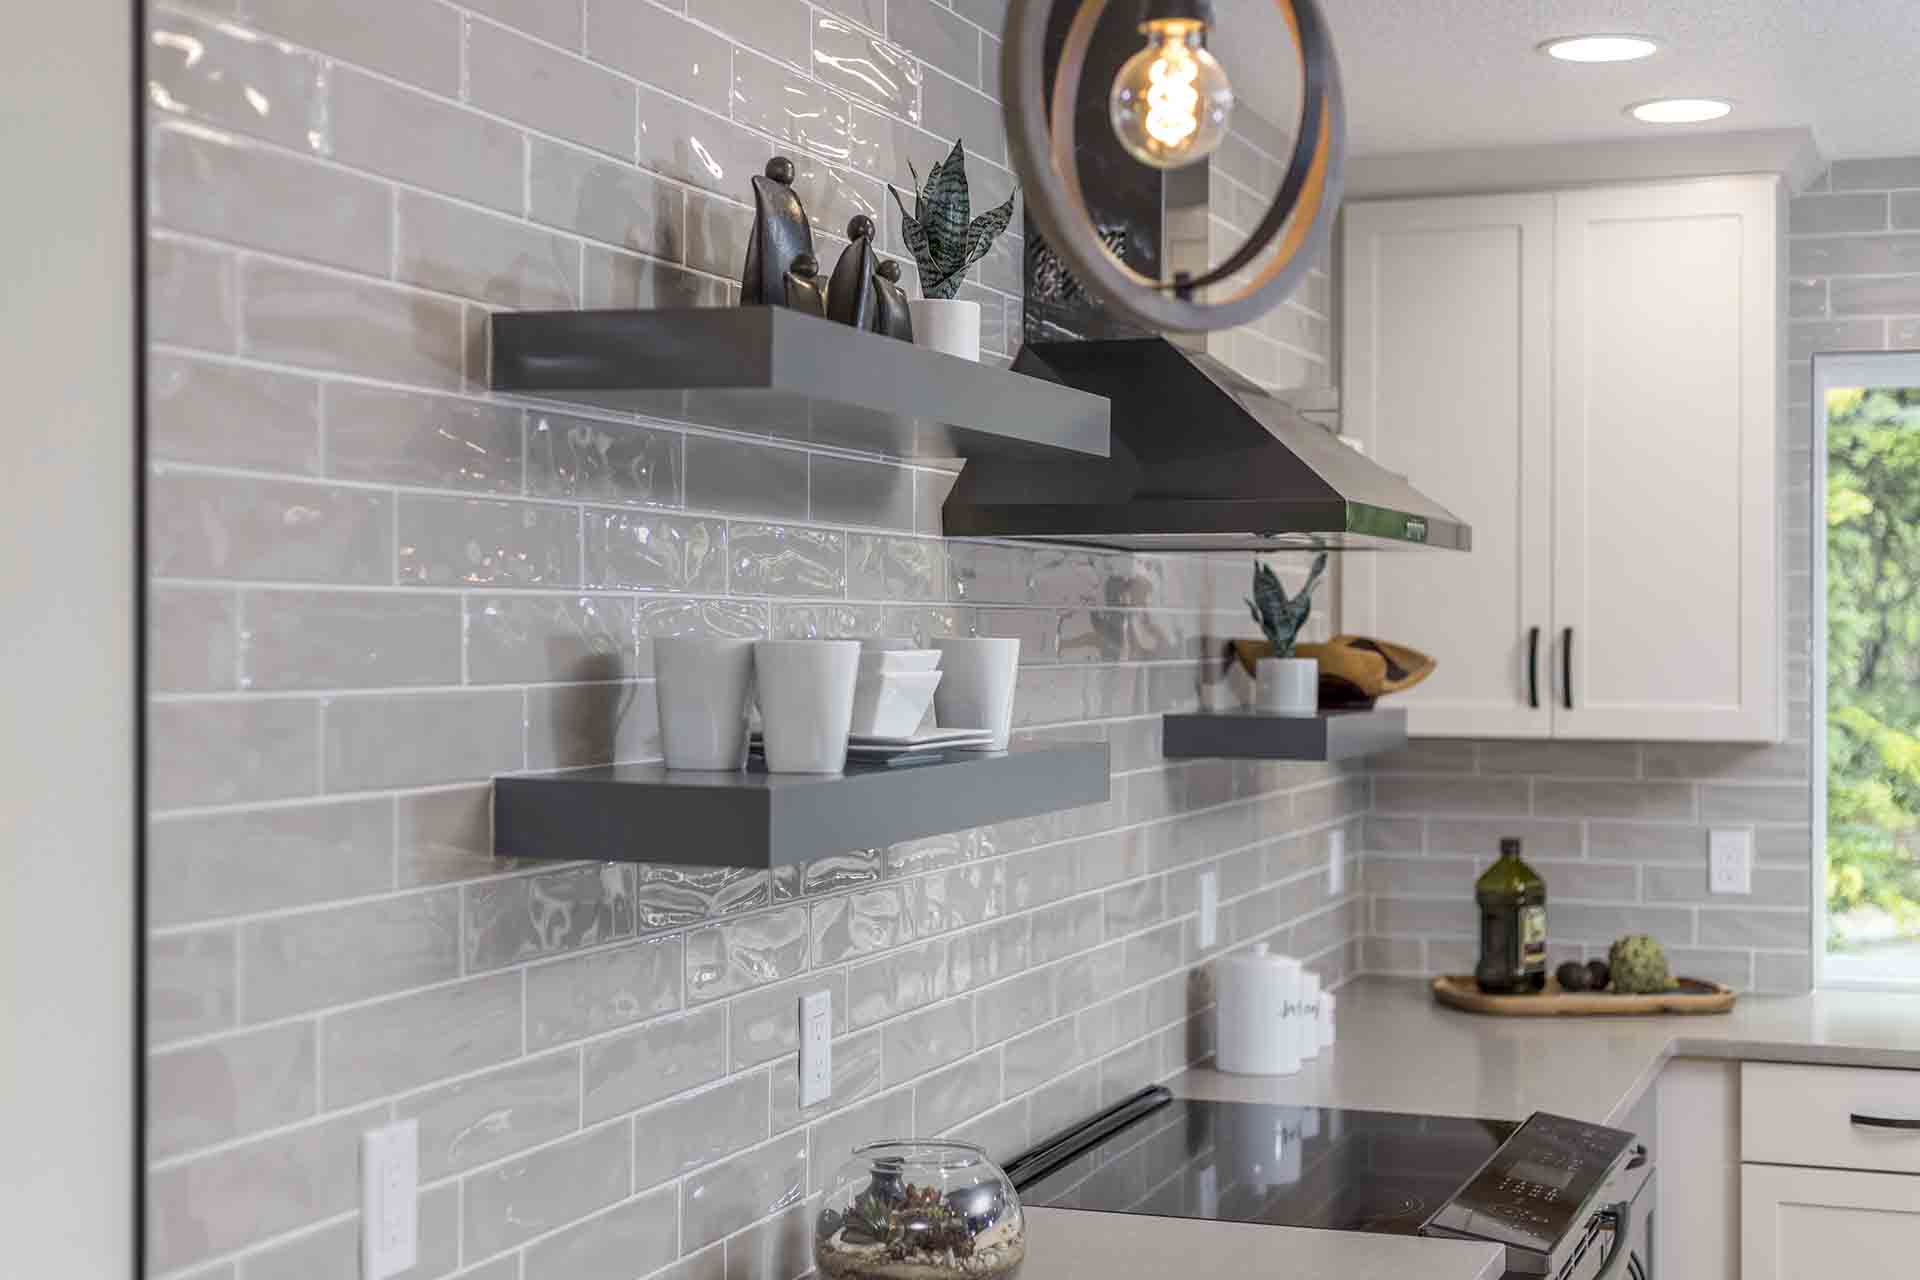 Image of floating shelves over the stove